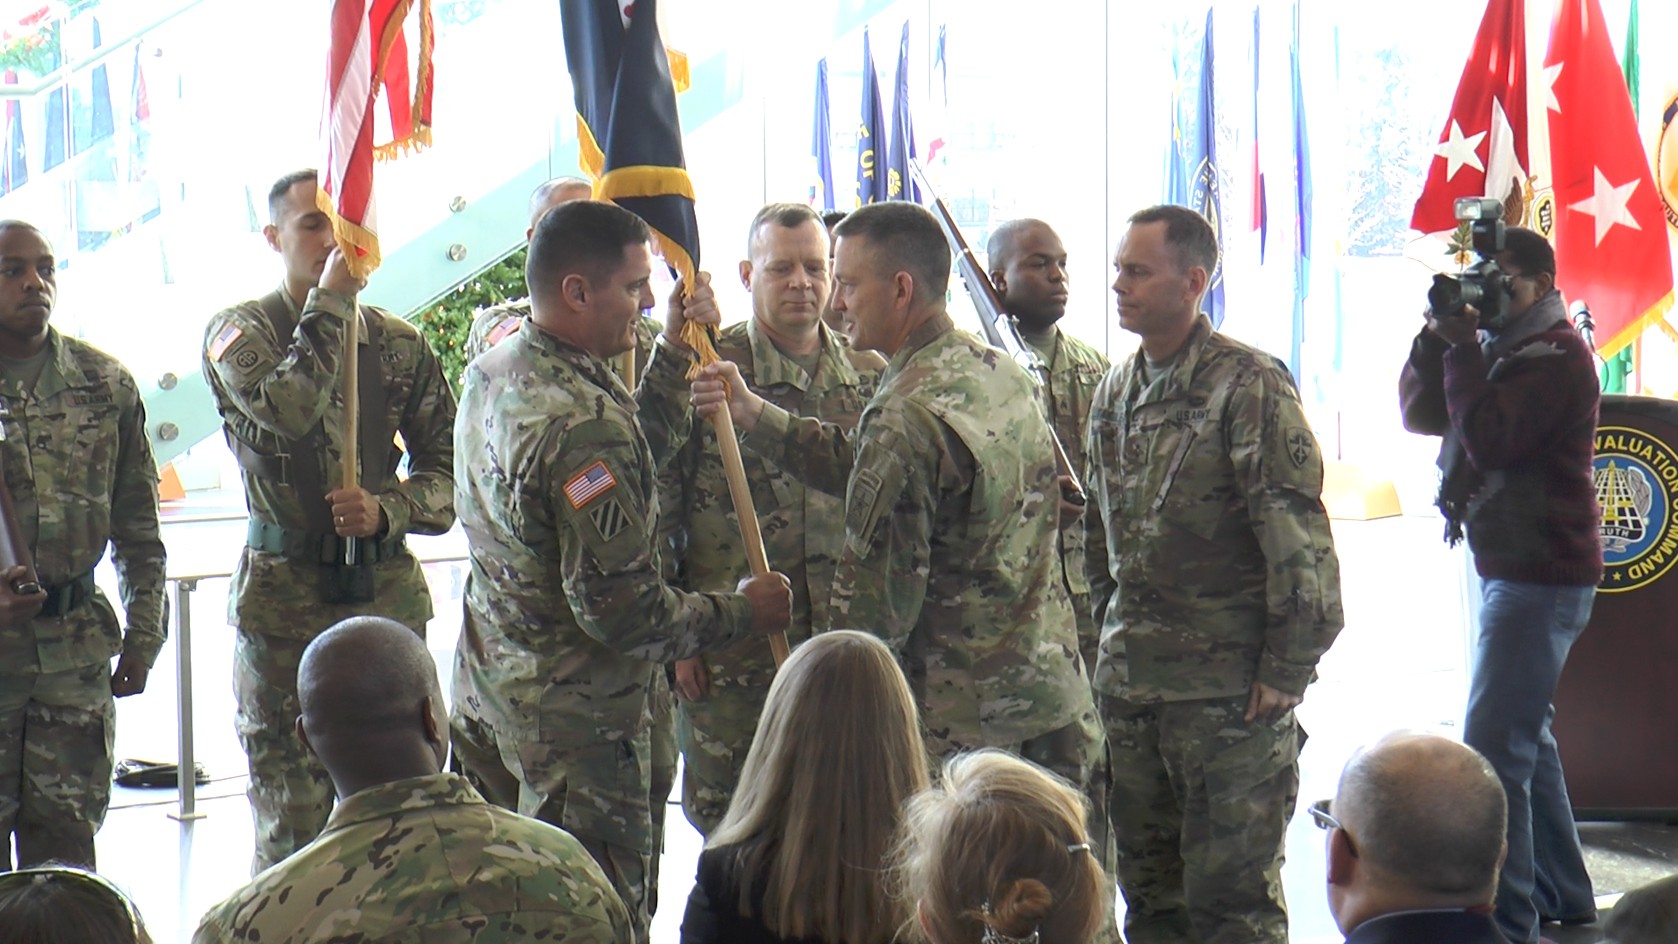 ATEC ushers in the new commander Article The United States Army